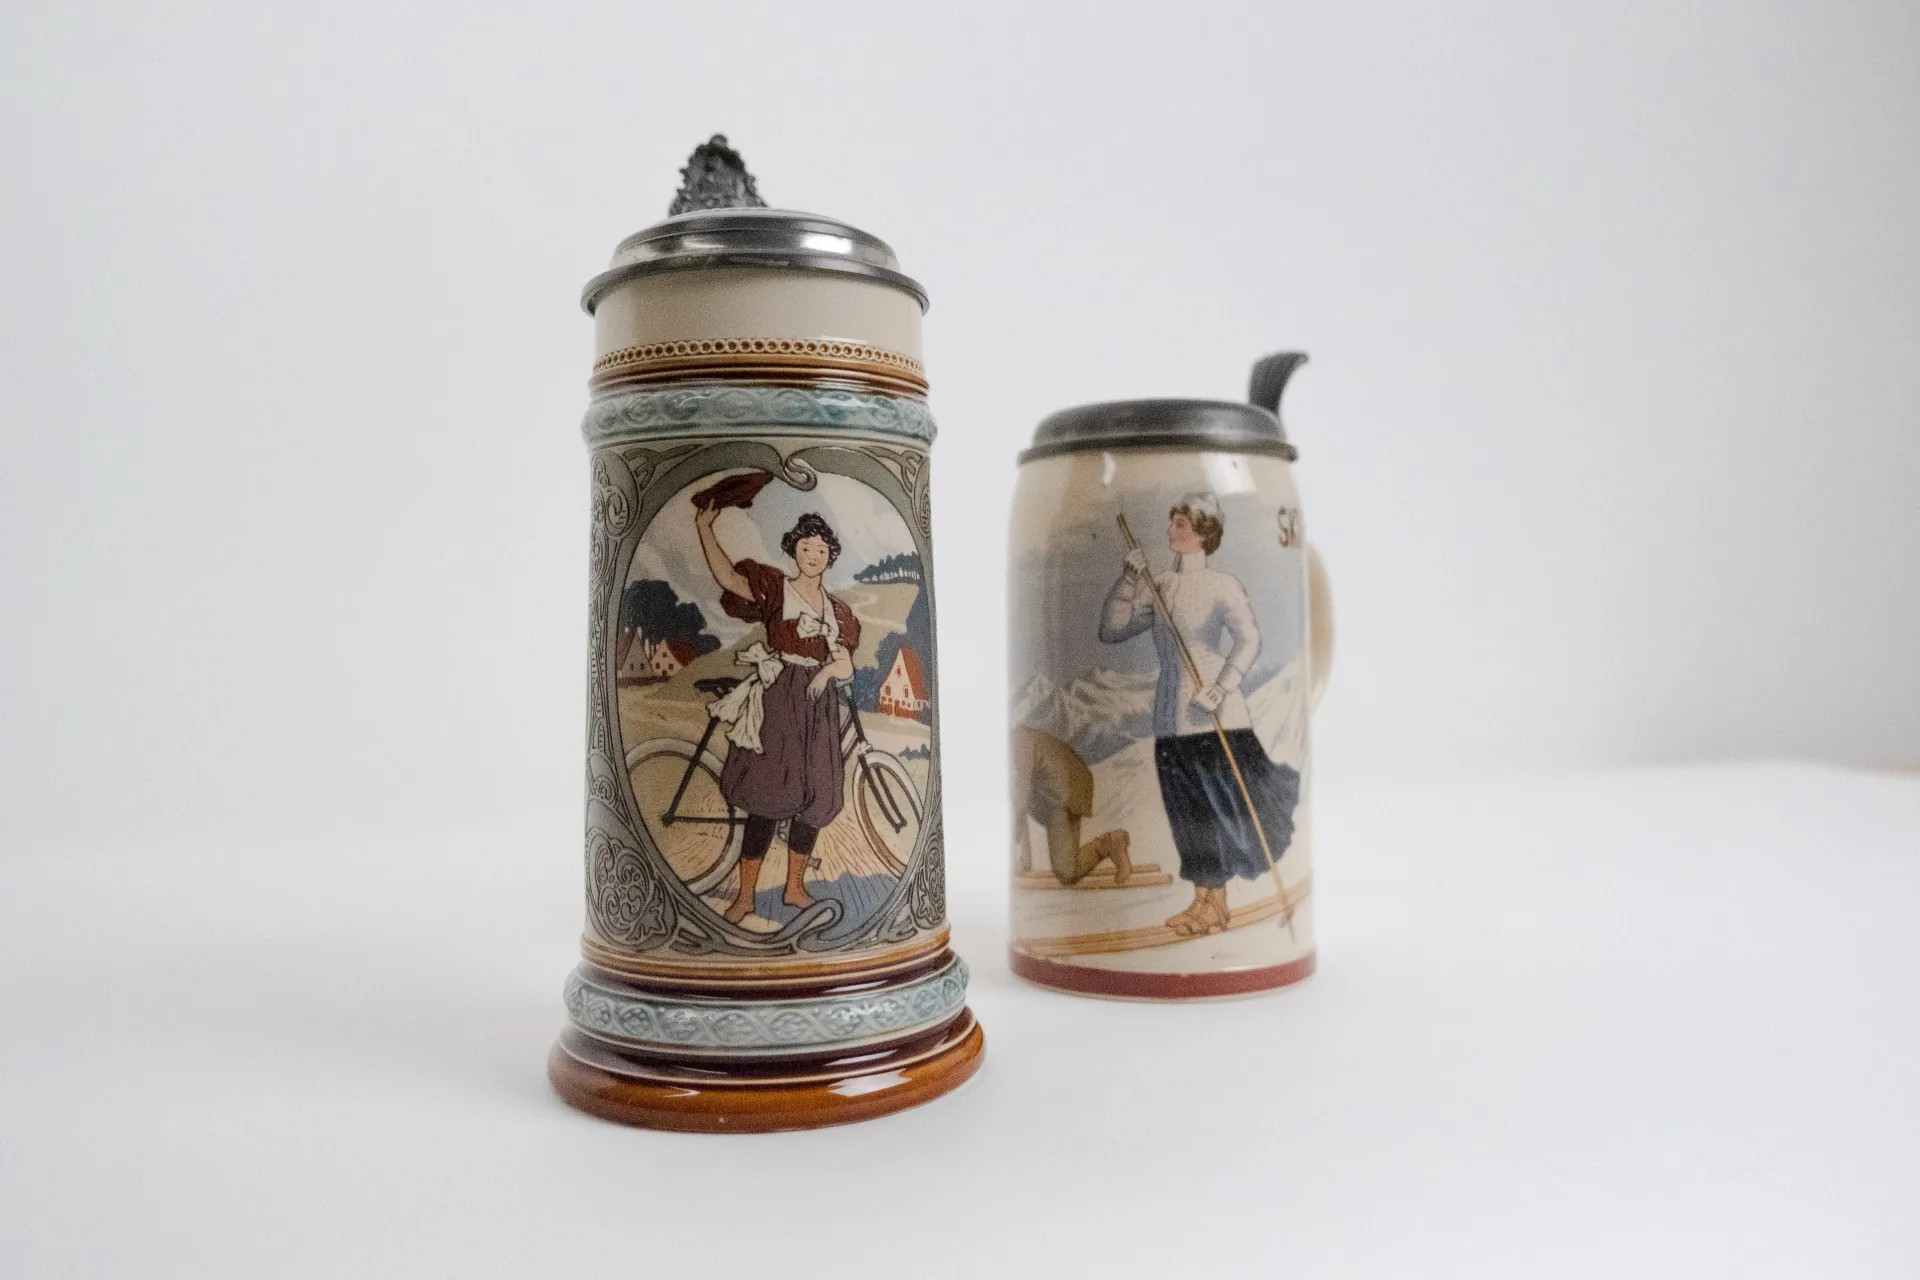 Villeroy and Boch. Girl Holding Safety Bicycle. Stein, etched, inlay. 1900. Collection of the American Museum of Ceramic Art; gift of Bob and Colette Wilson. (foreground)  Villeroy and Boch. Woman Skiing. Stein, print-under-glaze. 1911. Collection of the American Museum of Ceramic Art; gift of Bob and Colette Wilson. (background)